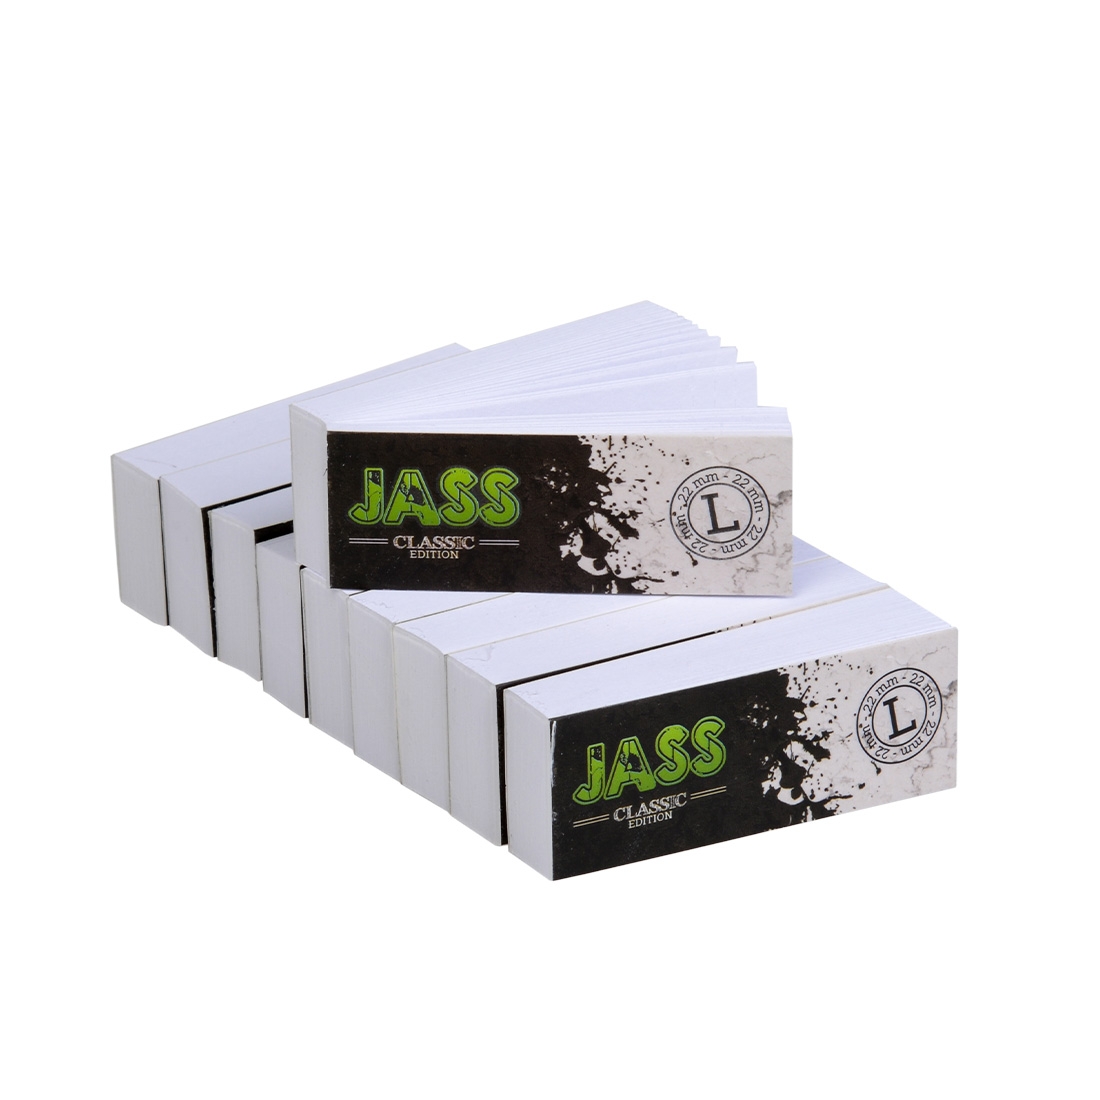 FILTER TIPS JASS CLASSIC EDITION x10 TAILLE L